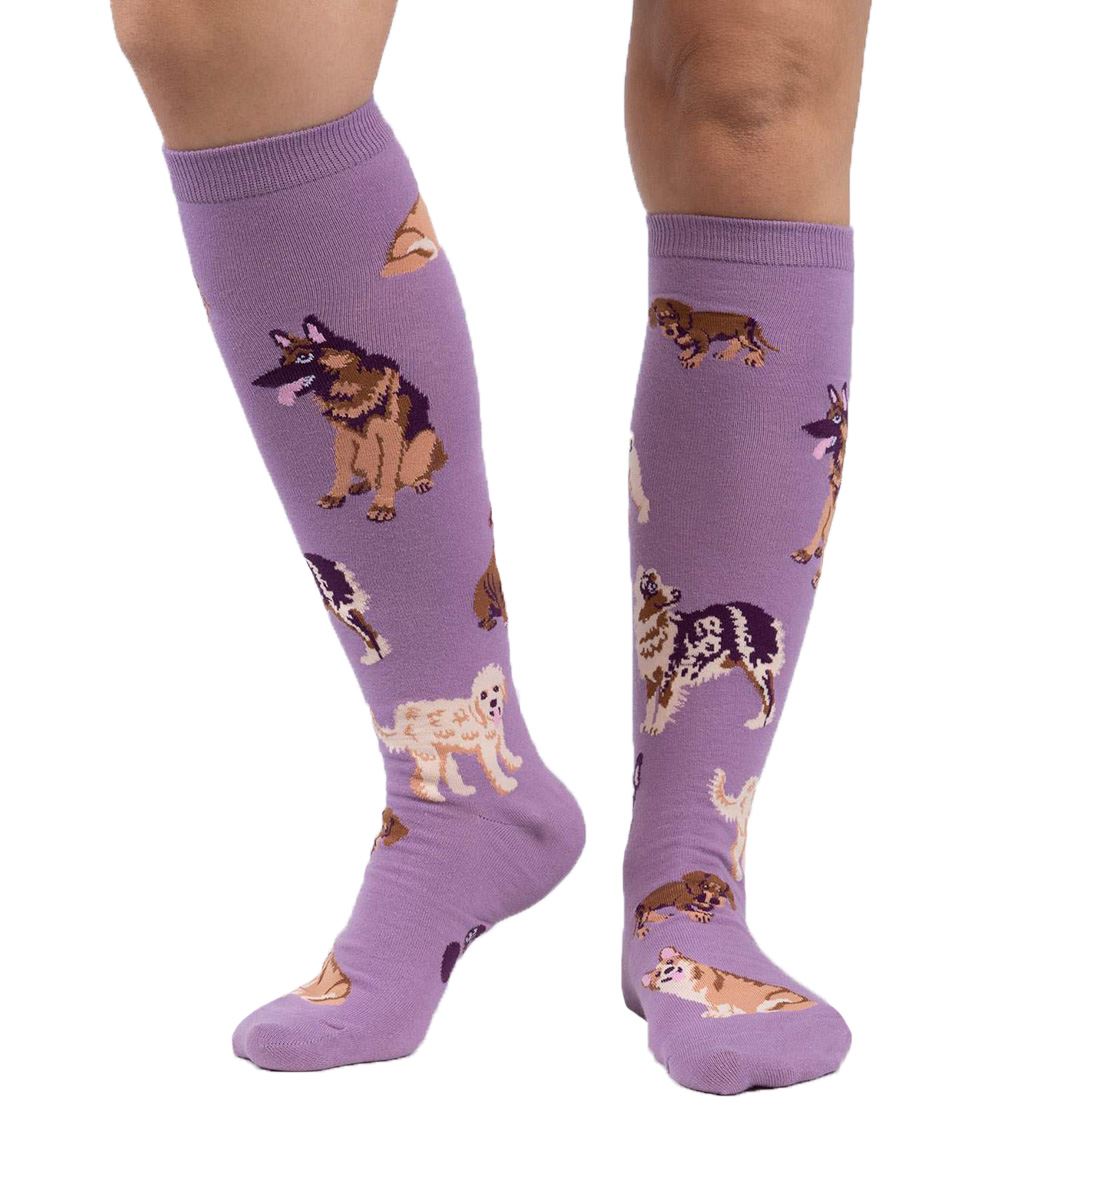 SOCK it to me Unisex Knee High Socks (F0523),Stay Pawsitive - Stay Pawsitive,One Size